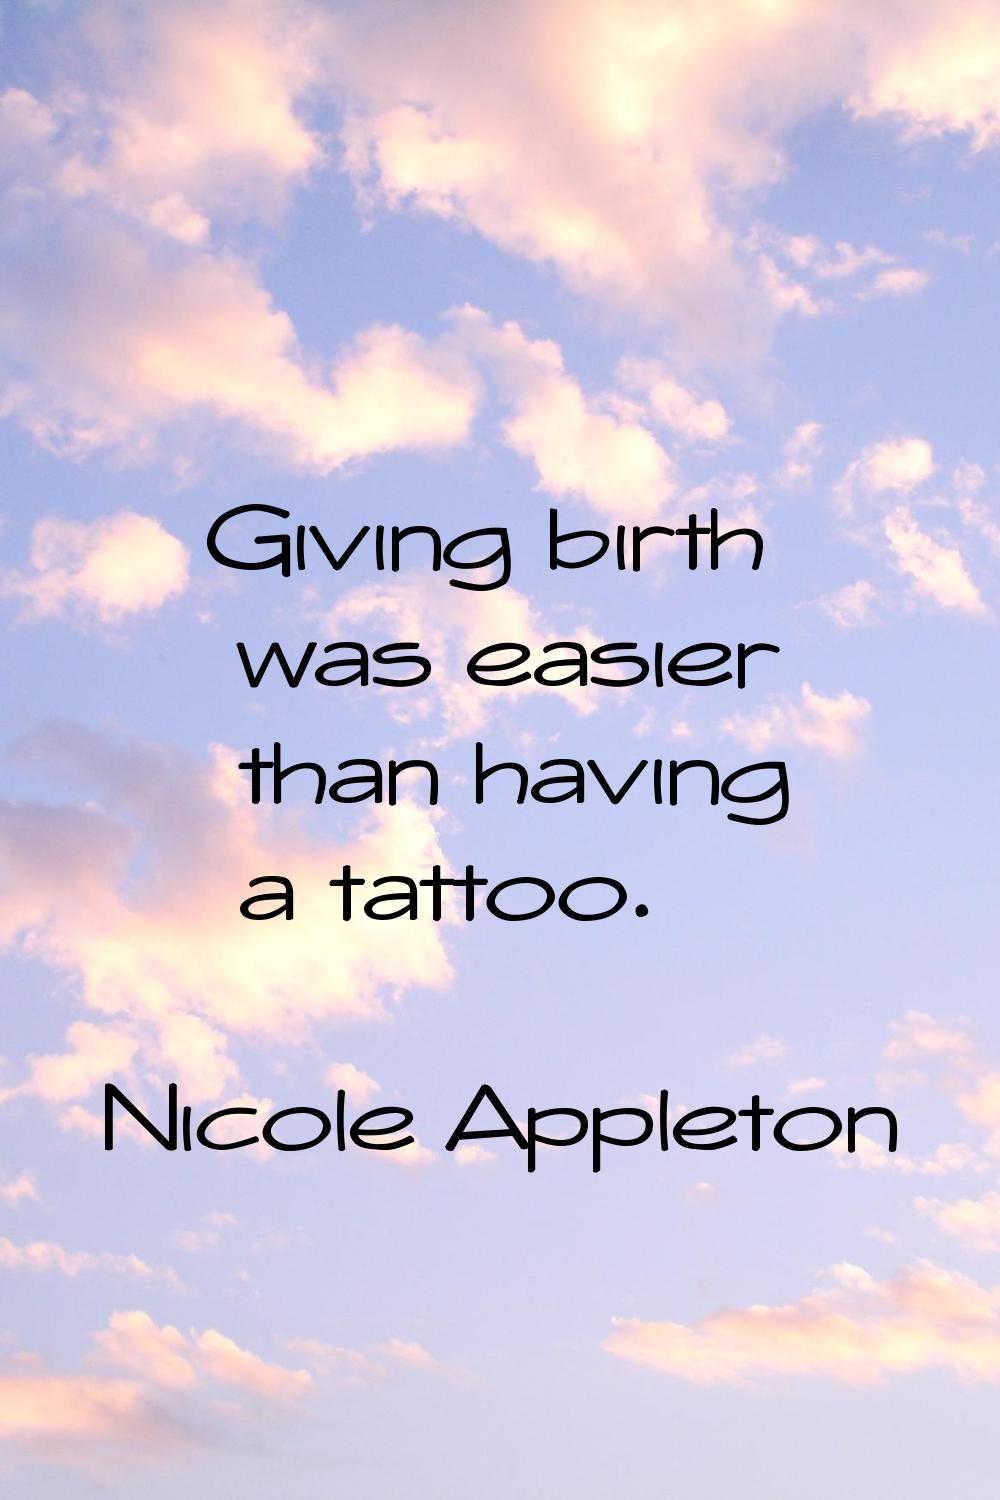 Giving birth was easier than having a tattoo.